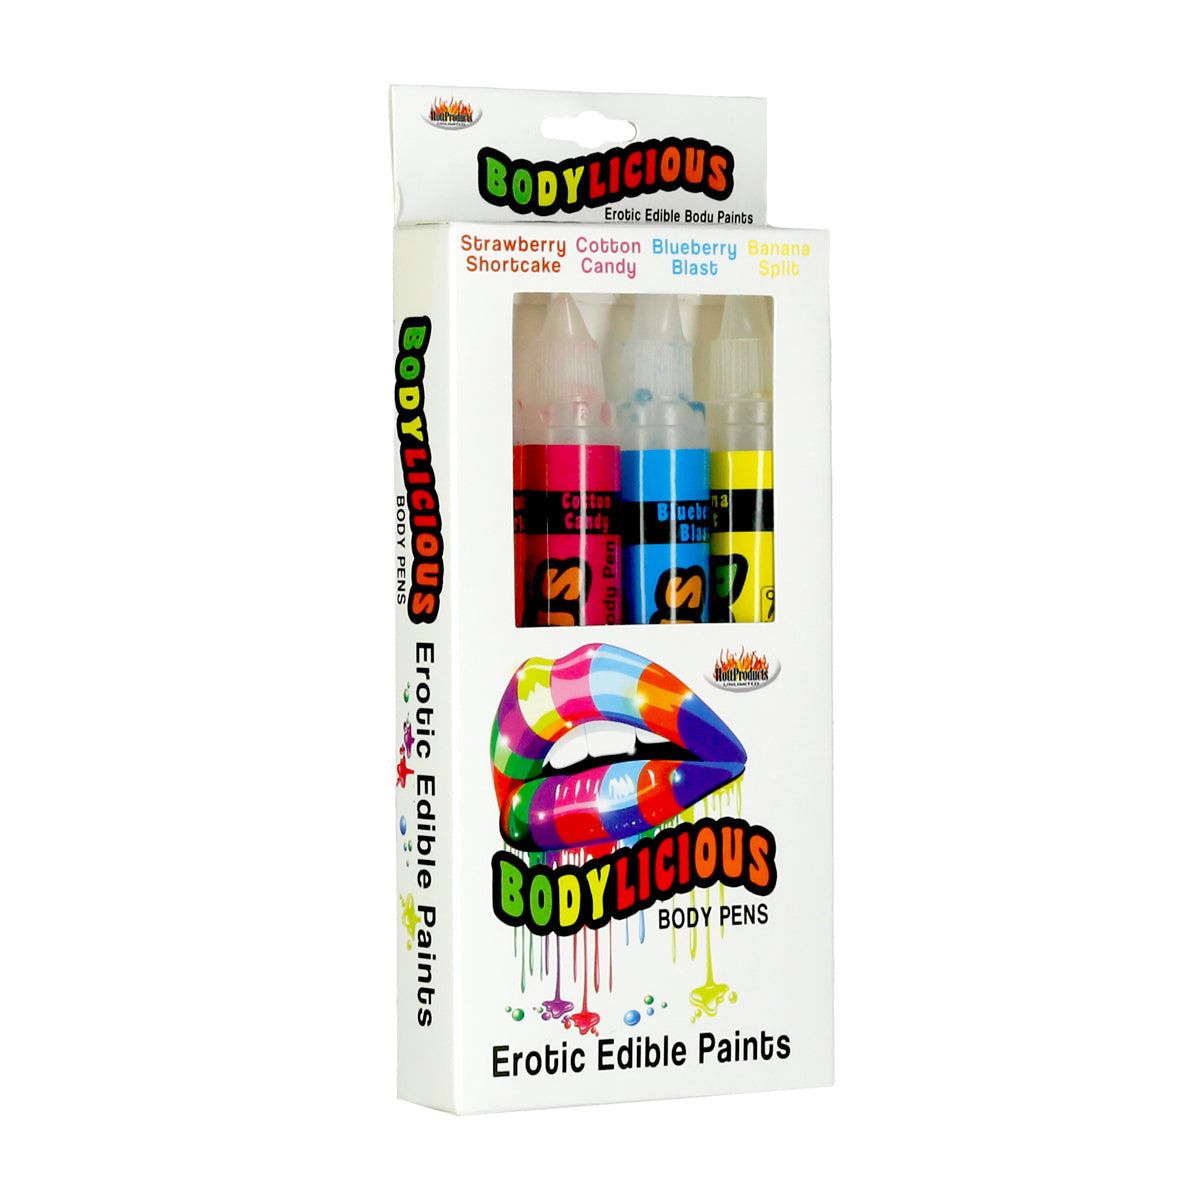 Hott Products - Bodylicious Erotic Edible Paint Body Pens – 4 Pack